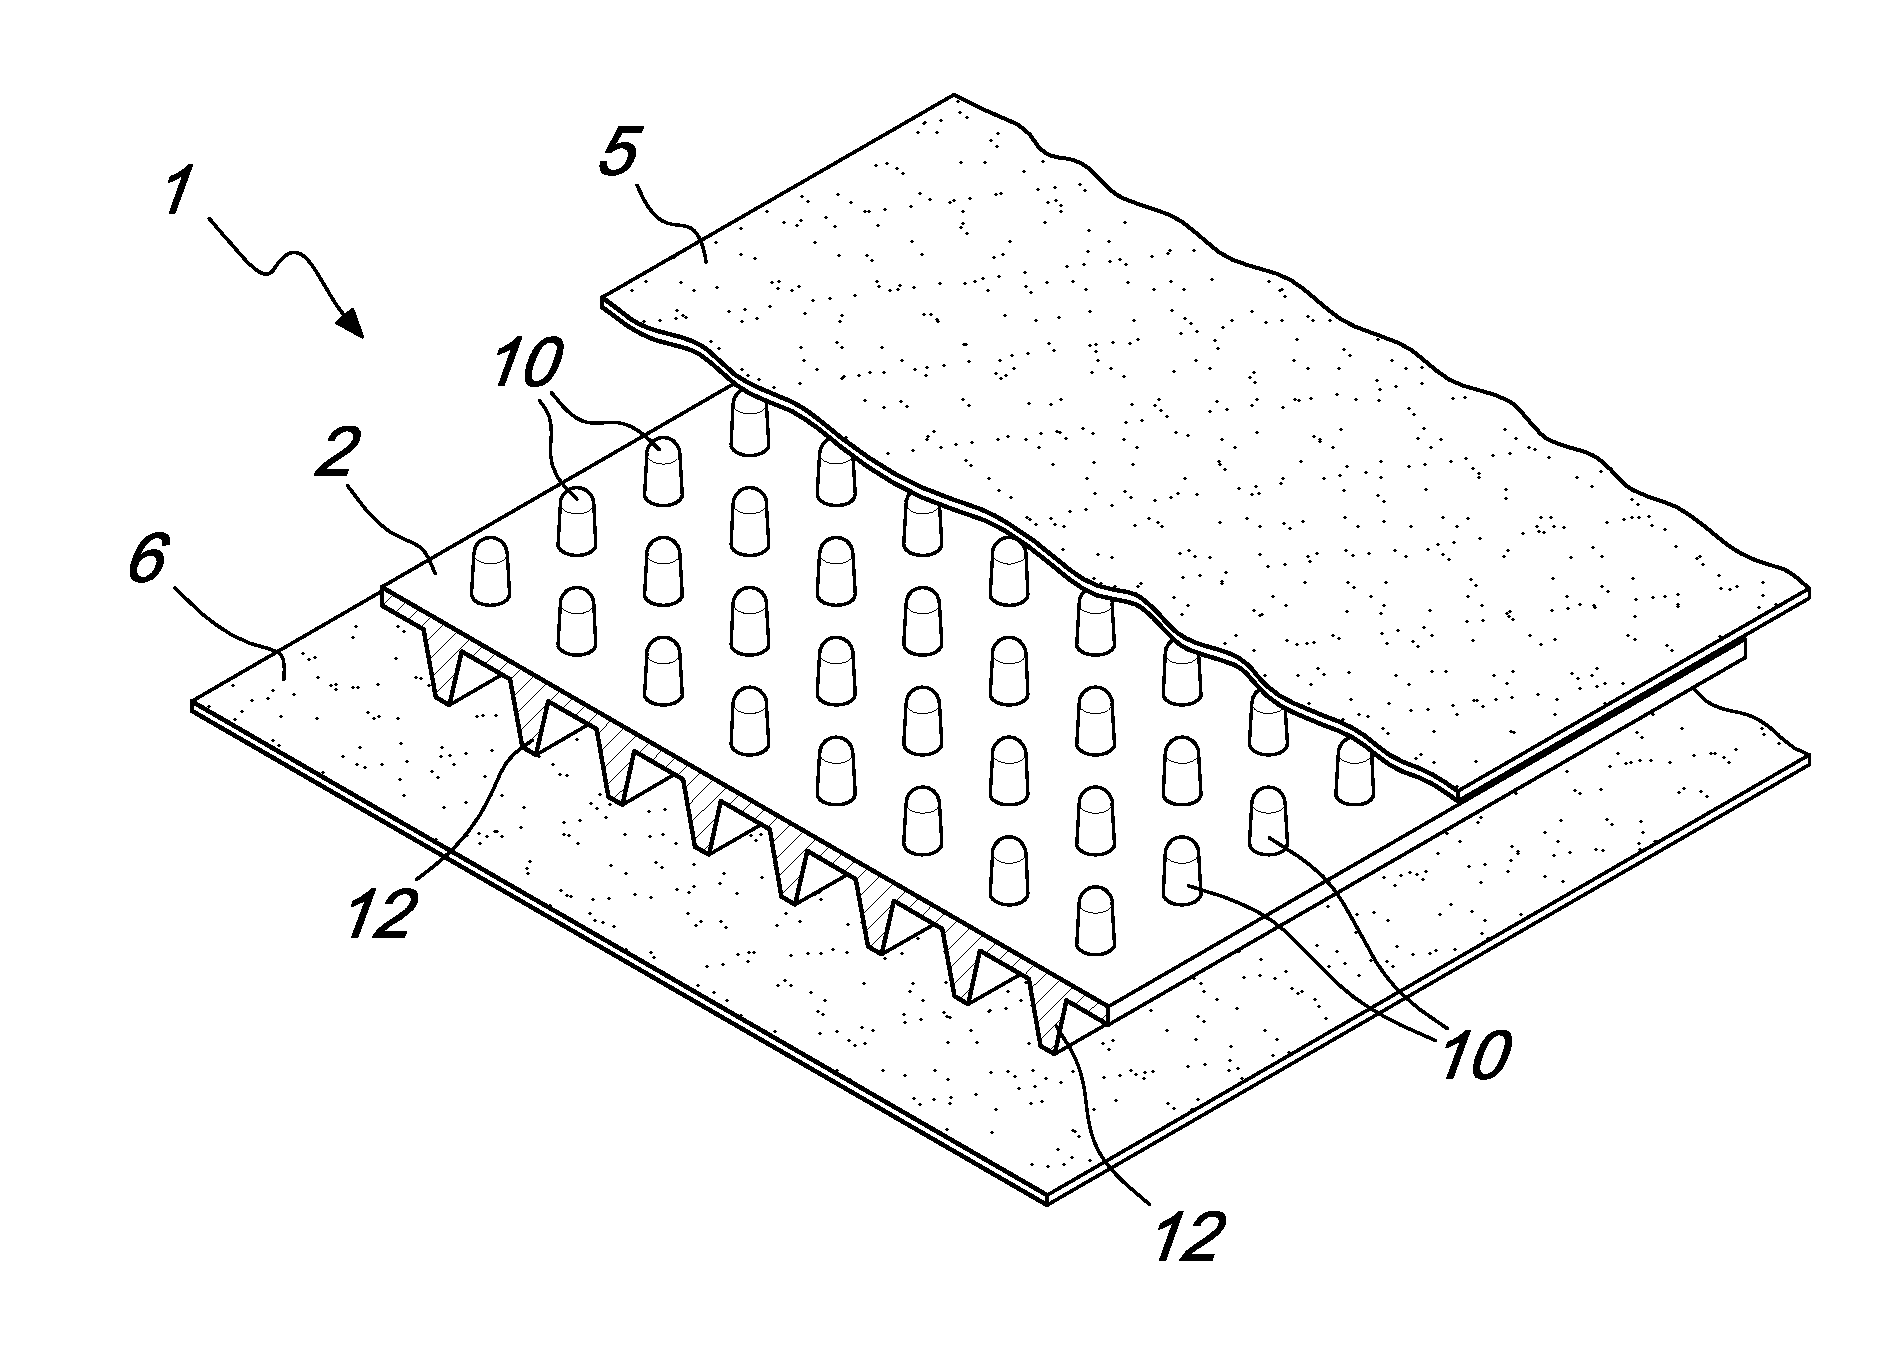 Composite for geotechnics, building and the like, with impermeable layer